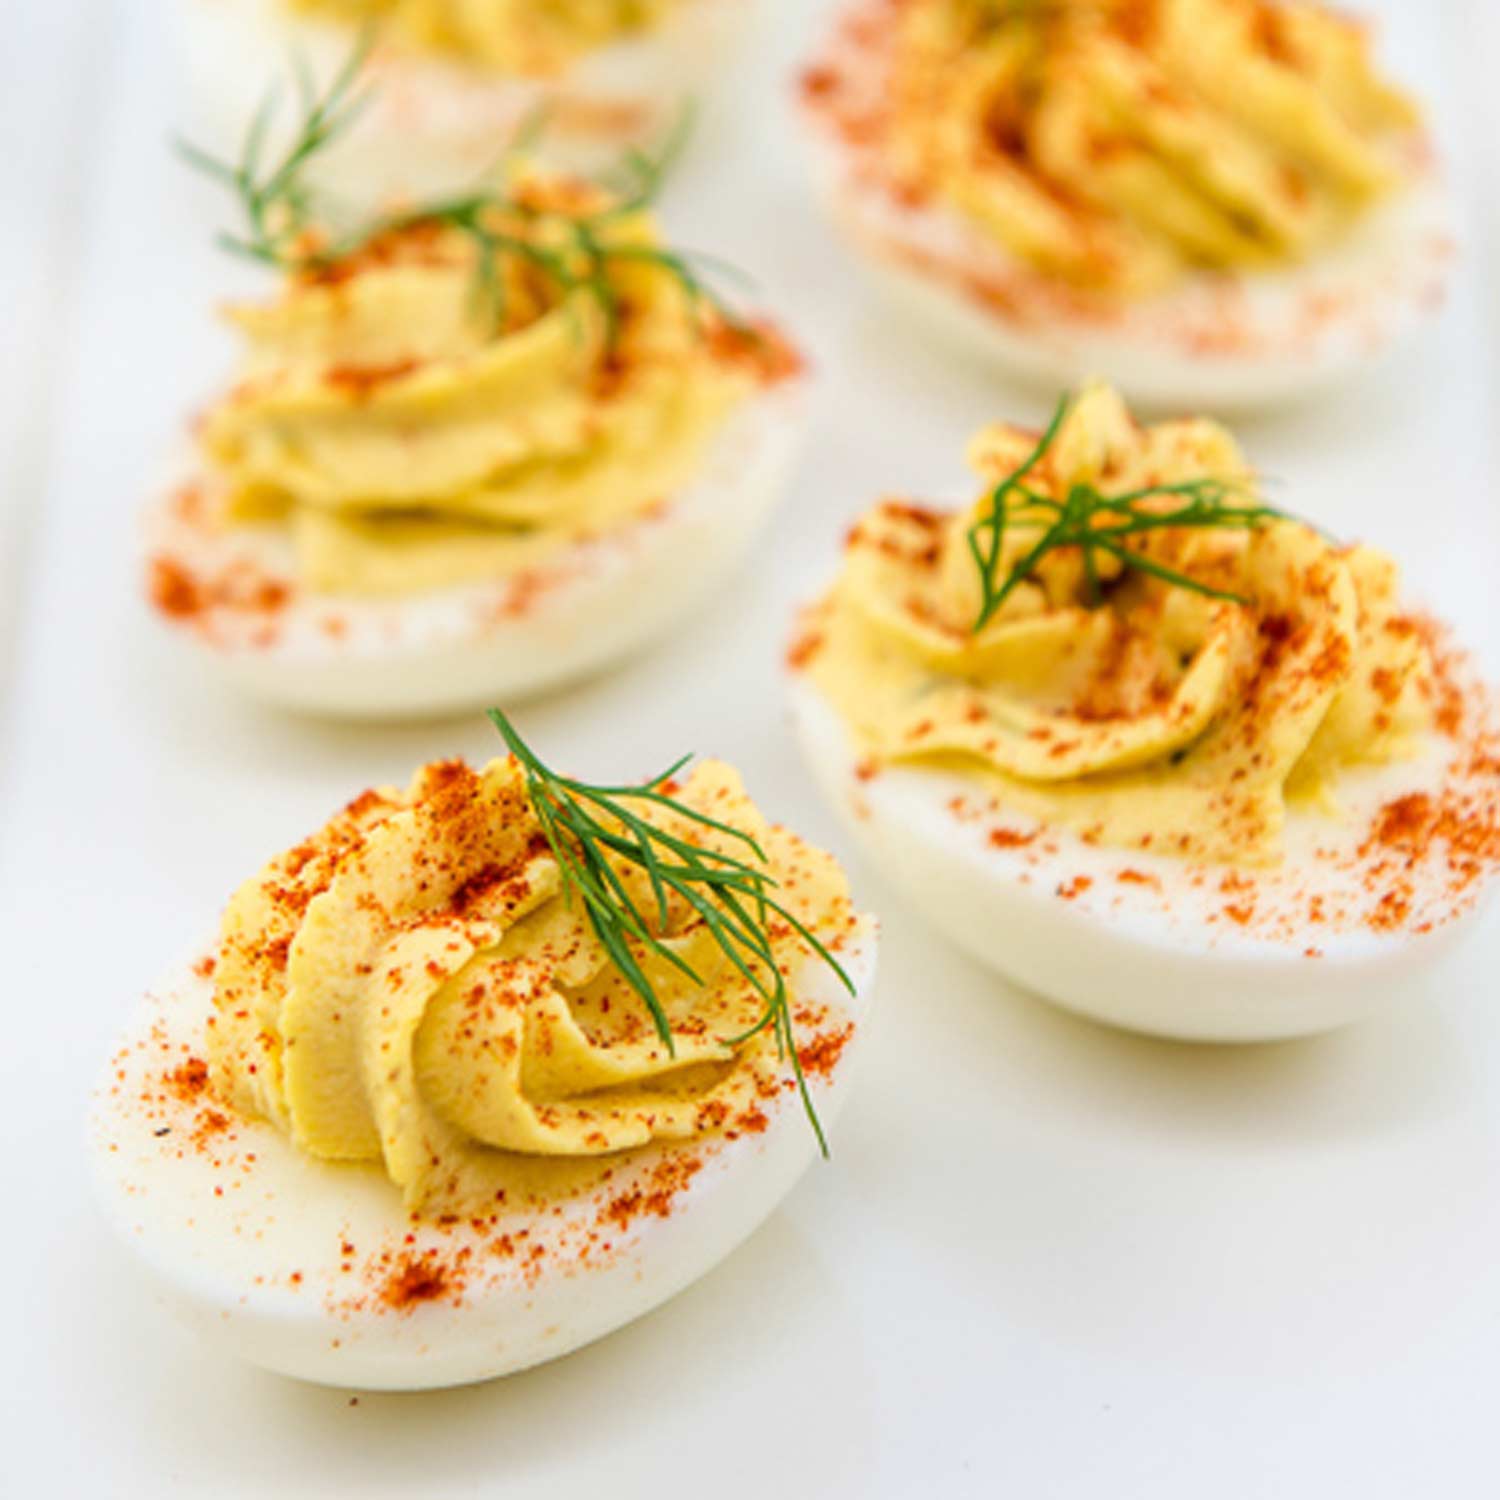 make hard boiled eggs the easy way for classic deviled eggs